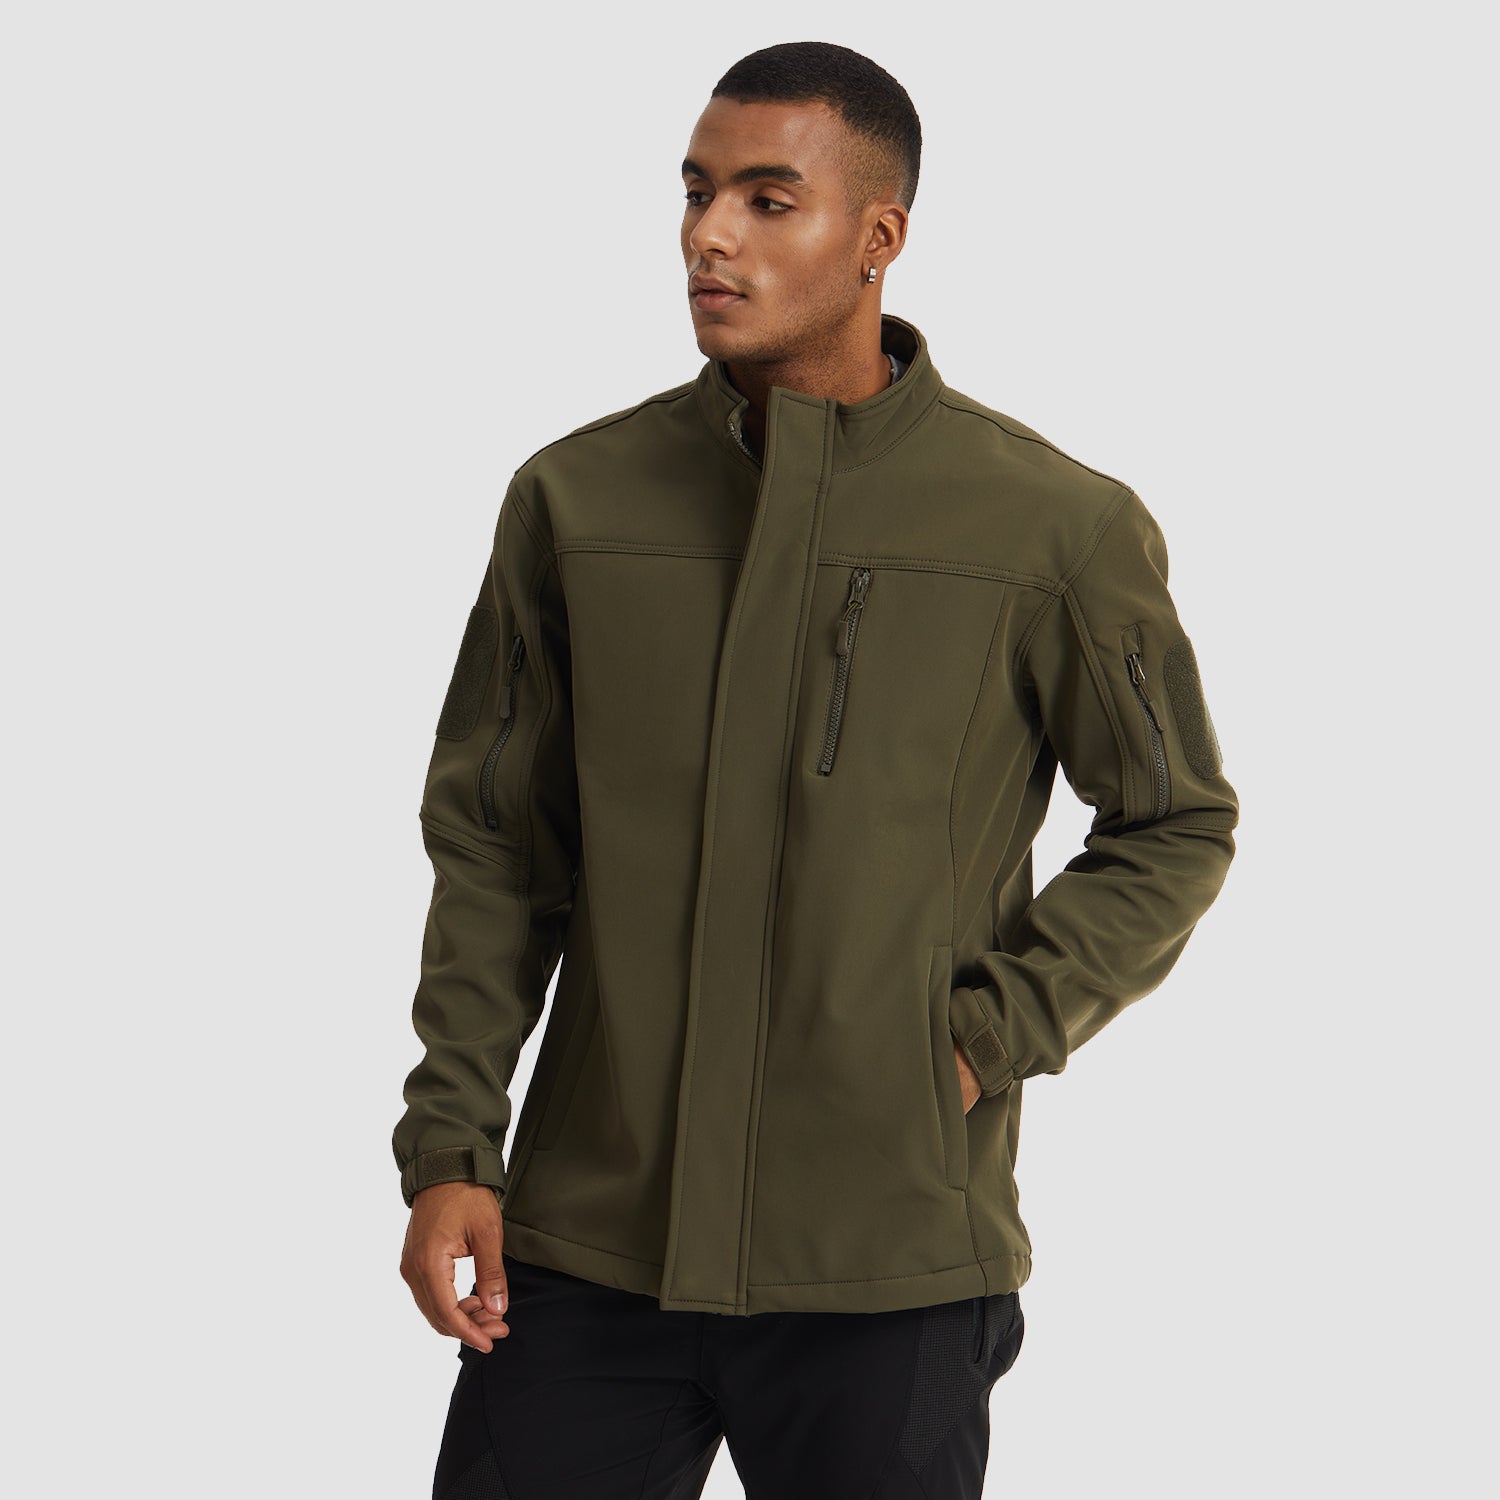 Men's Softshell Tactical Jacket Water-Resistant Fleece Lining Jacket for  Outdoors